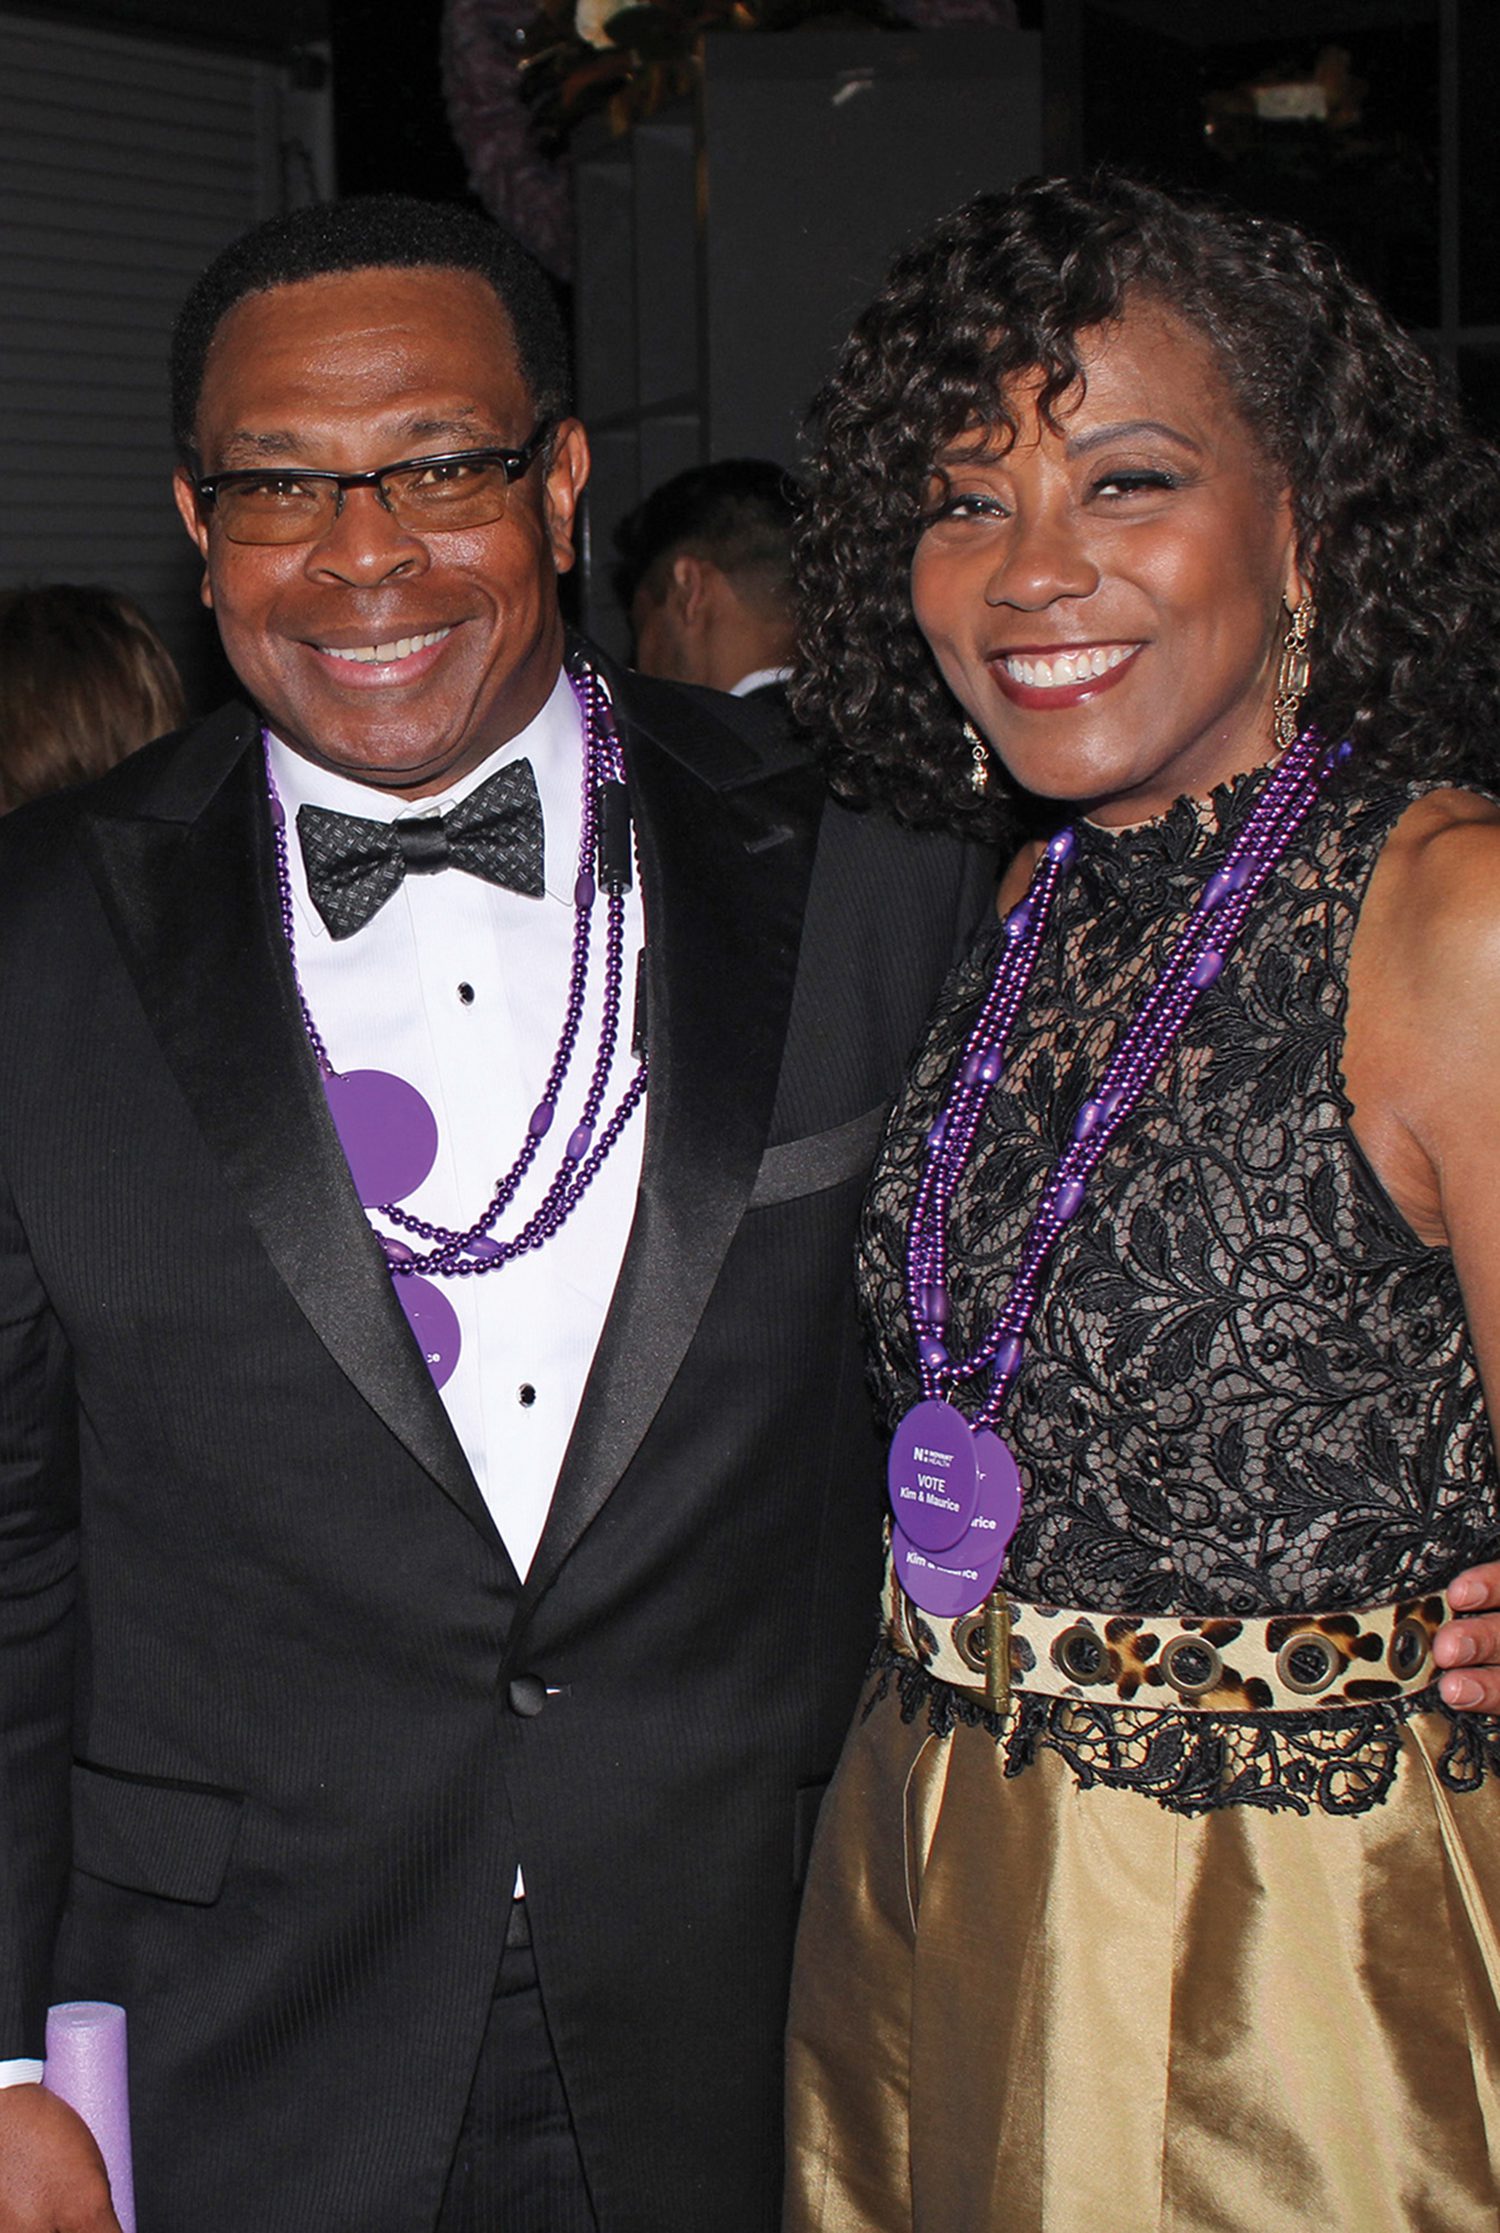 Jesse and Angela Cureton attend Charlotte Ballet's Dancing with the Stars Gala.